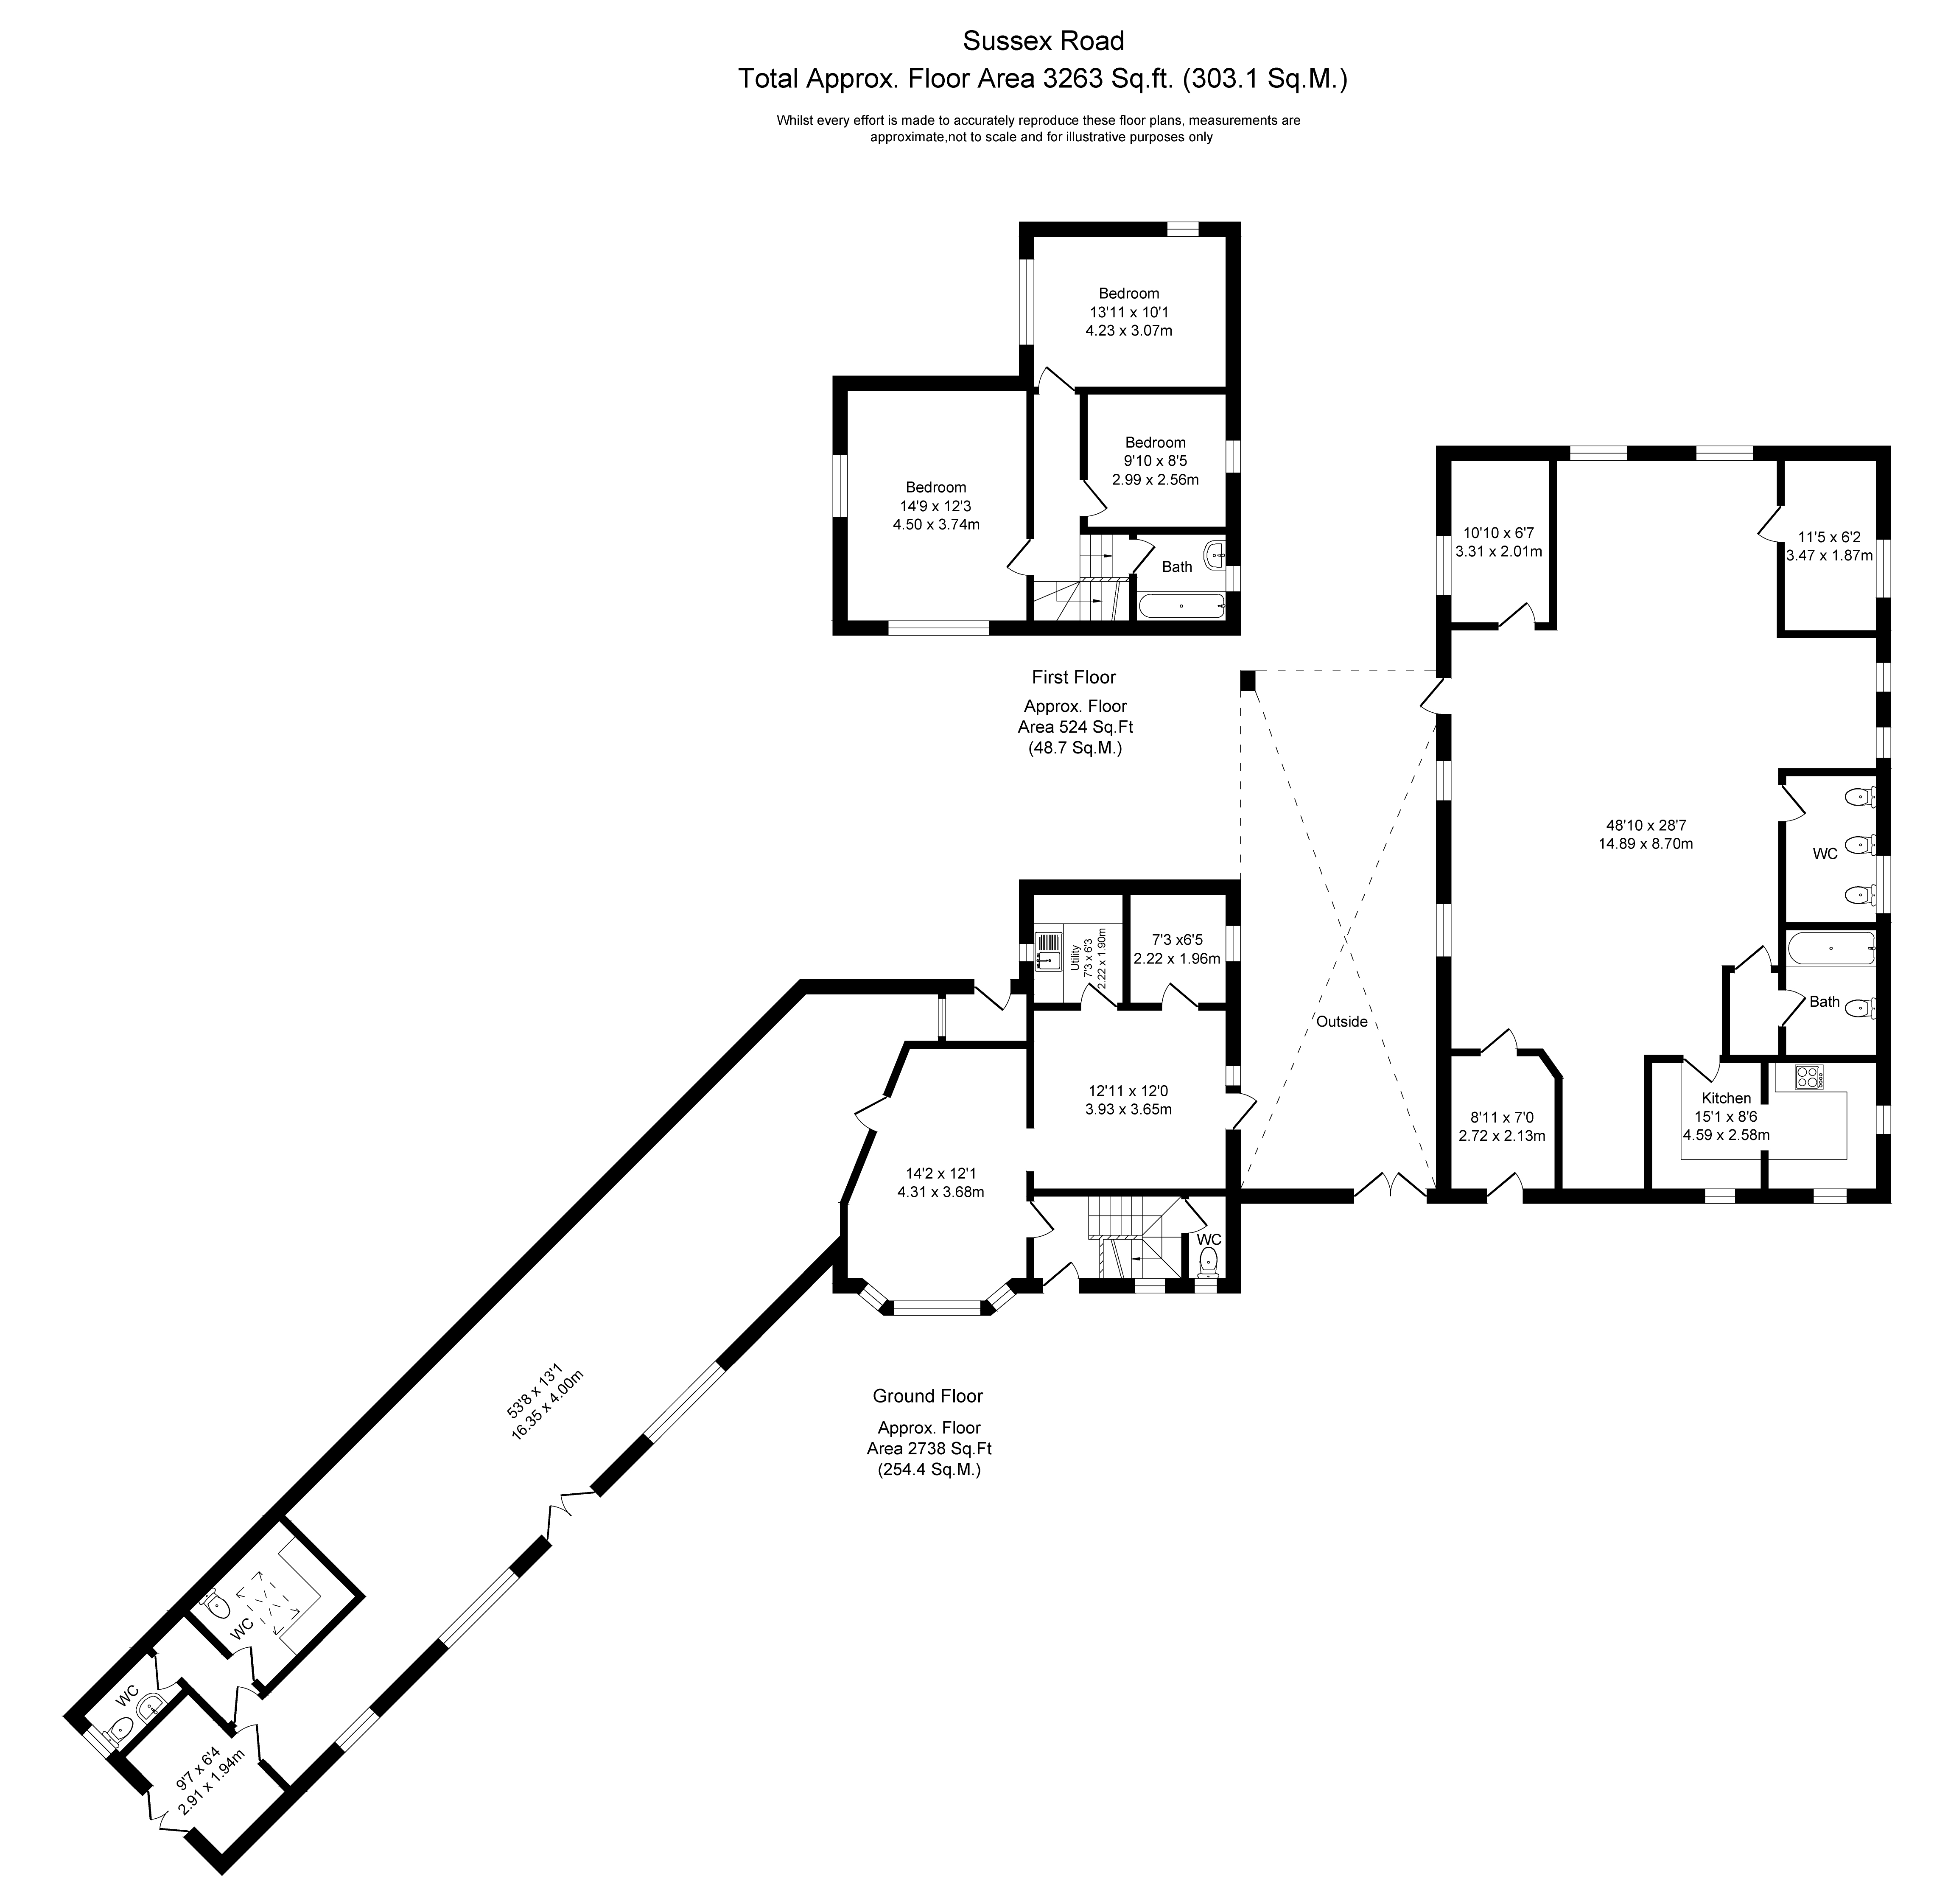 Floorplans For Sussex Road, Southport